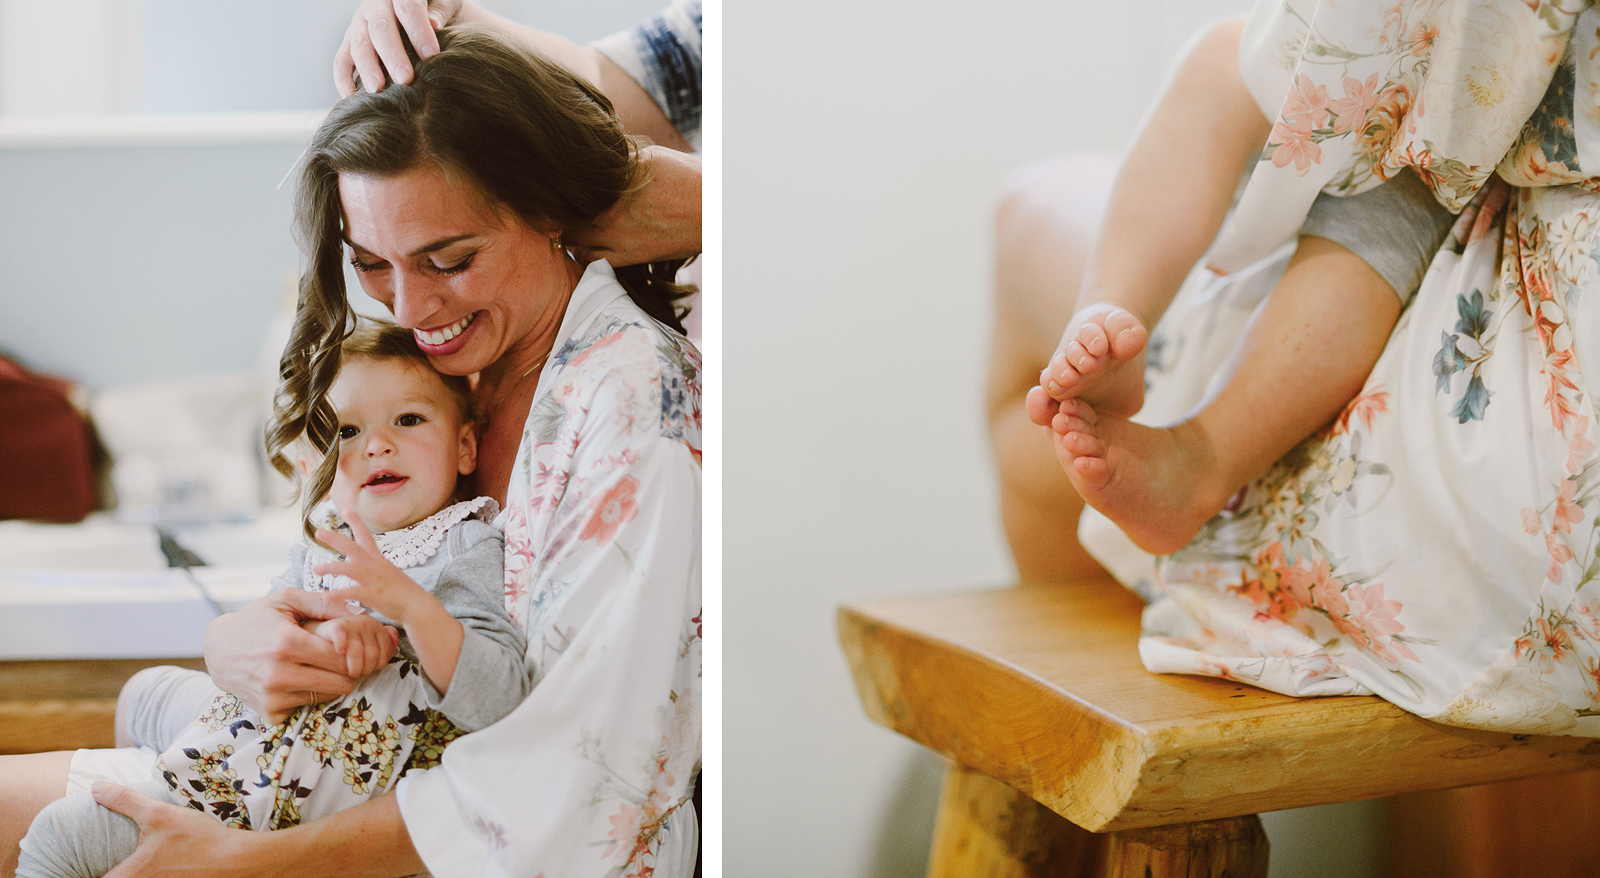 Bride smiling while holding her baby and getting her hair done - Columbia River Gorge wedding